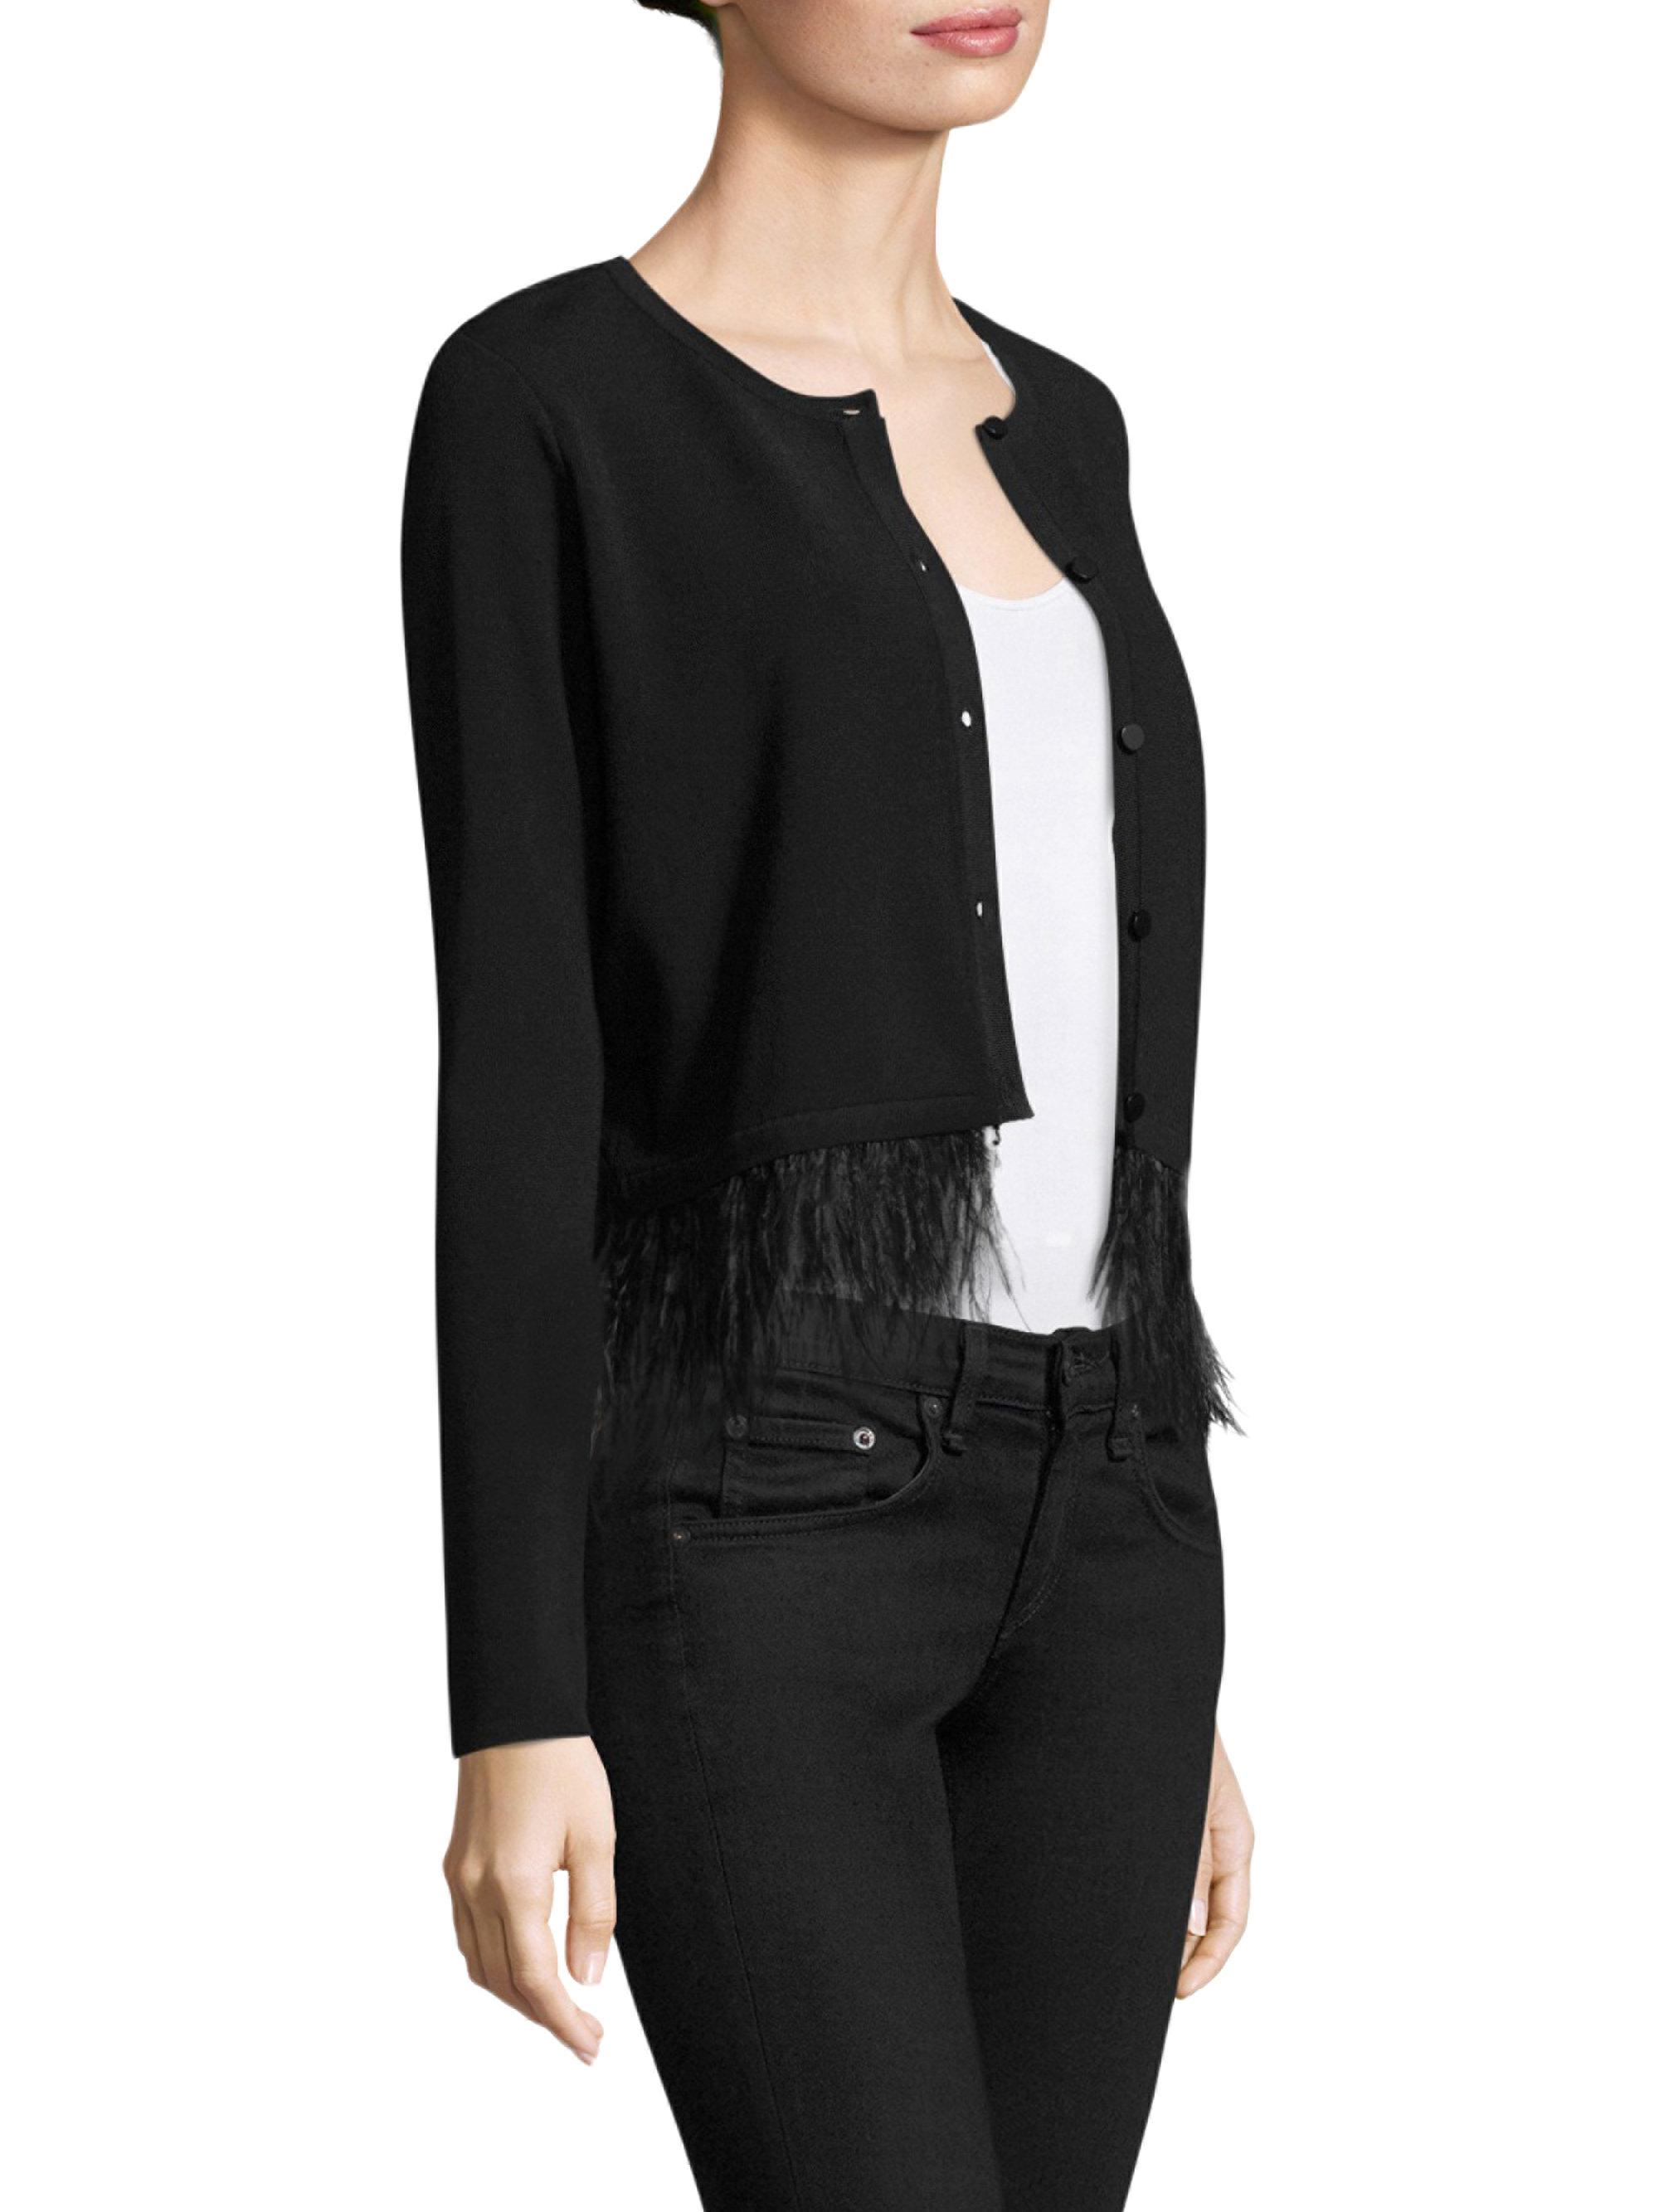 MILLY Synthetic Feather Trim Cardigan in Black - Lyst